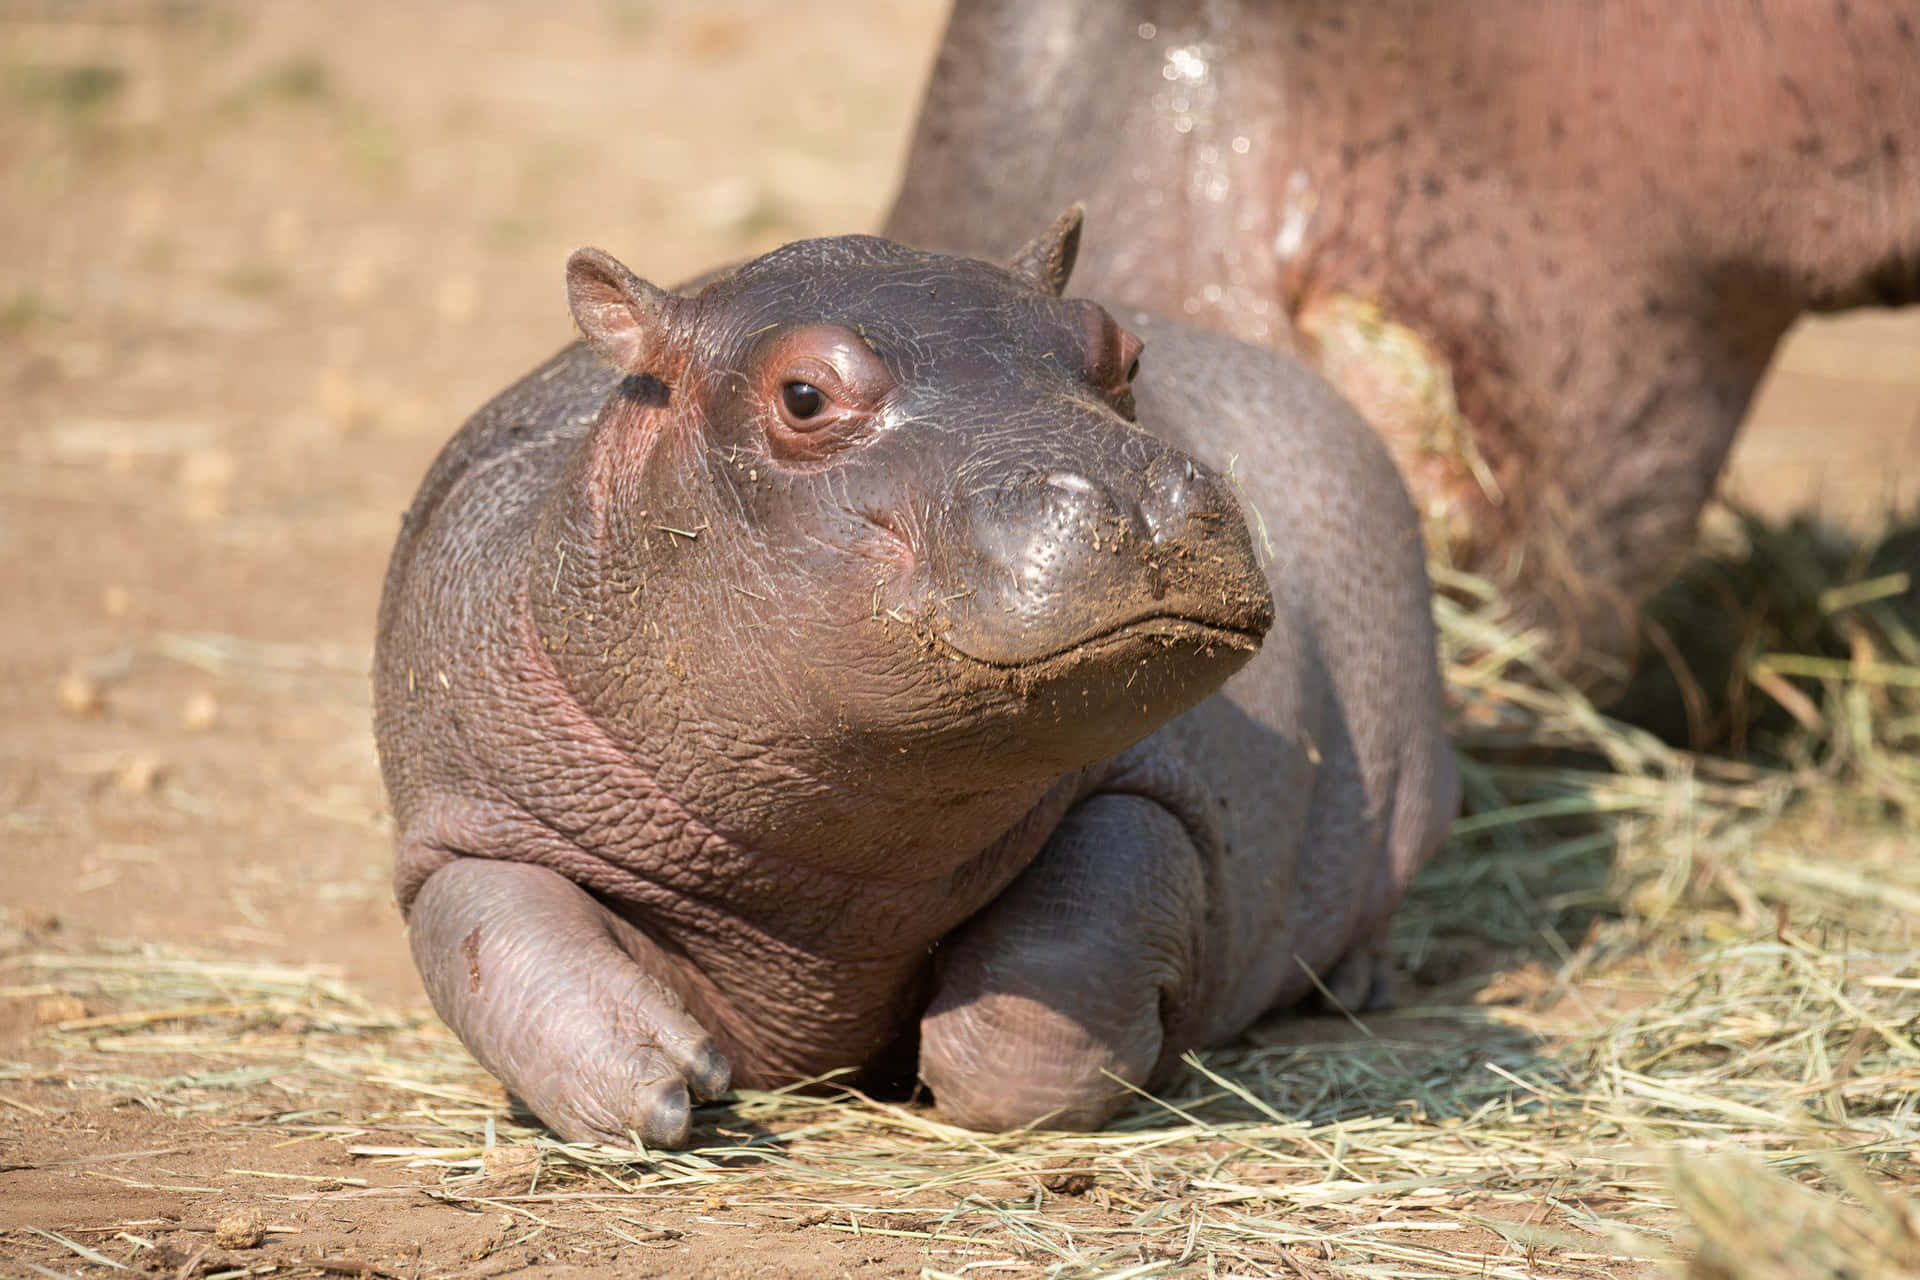 Cute Hippo Spotted in the Wild